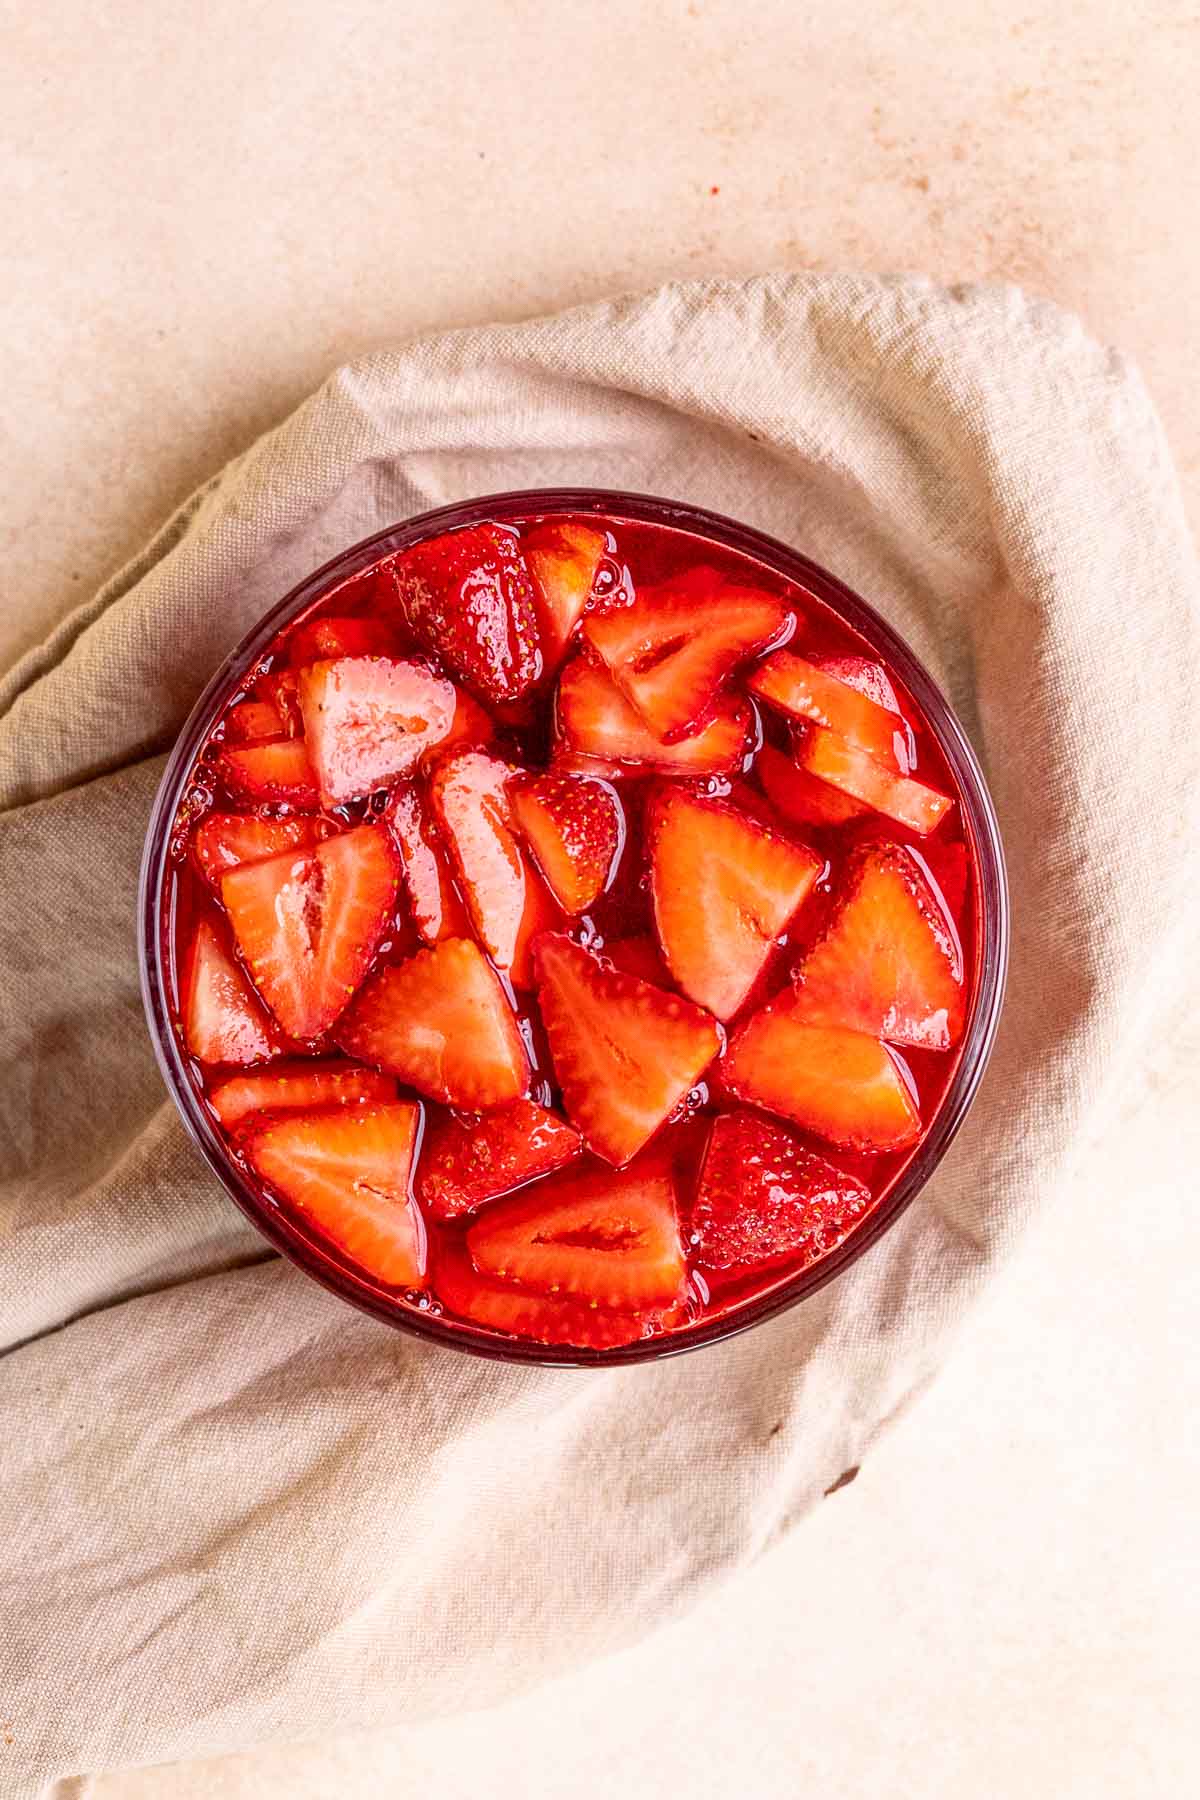 Strawberry Pretzel Salad strawberries in sauce in mixing bowl